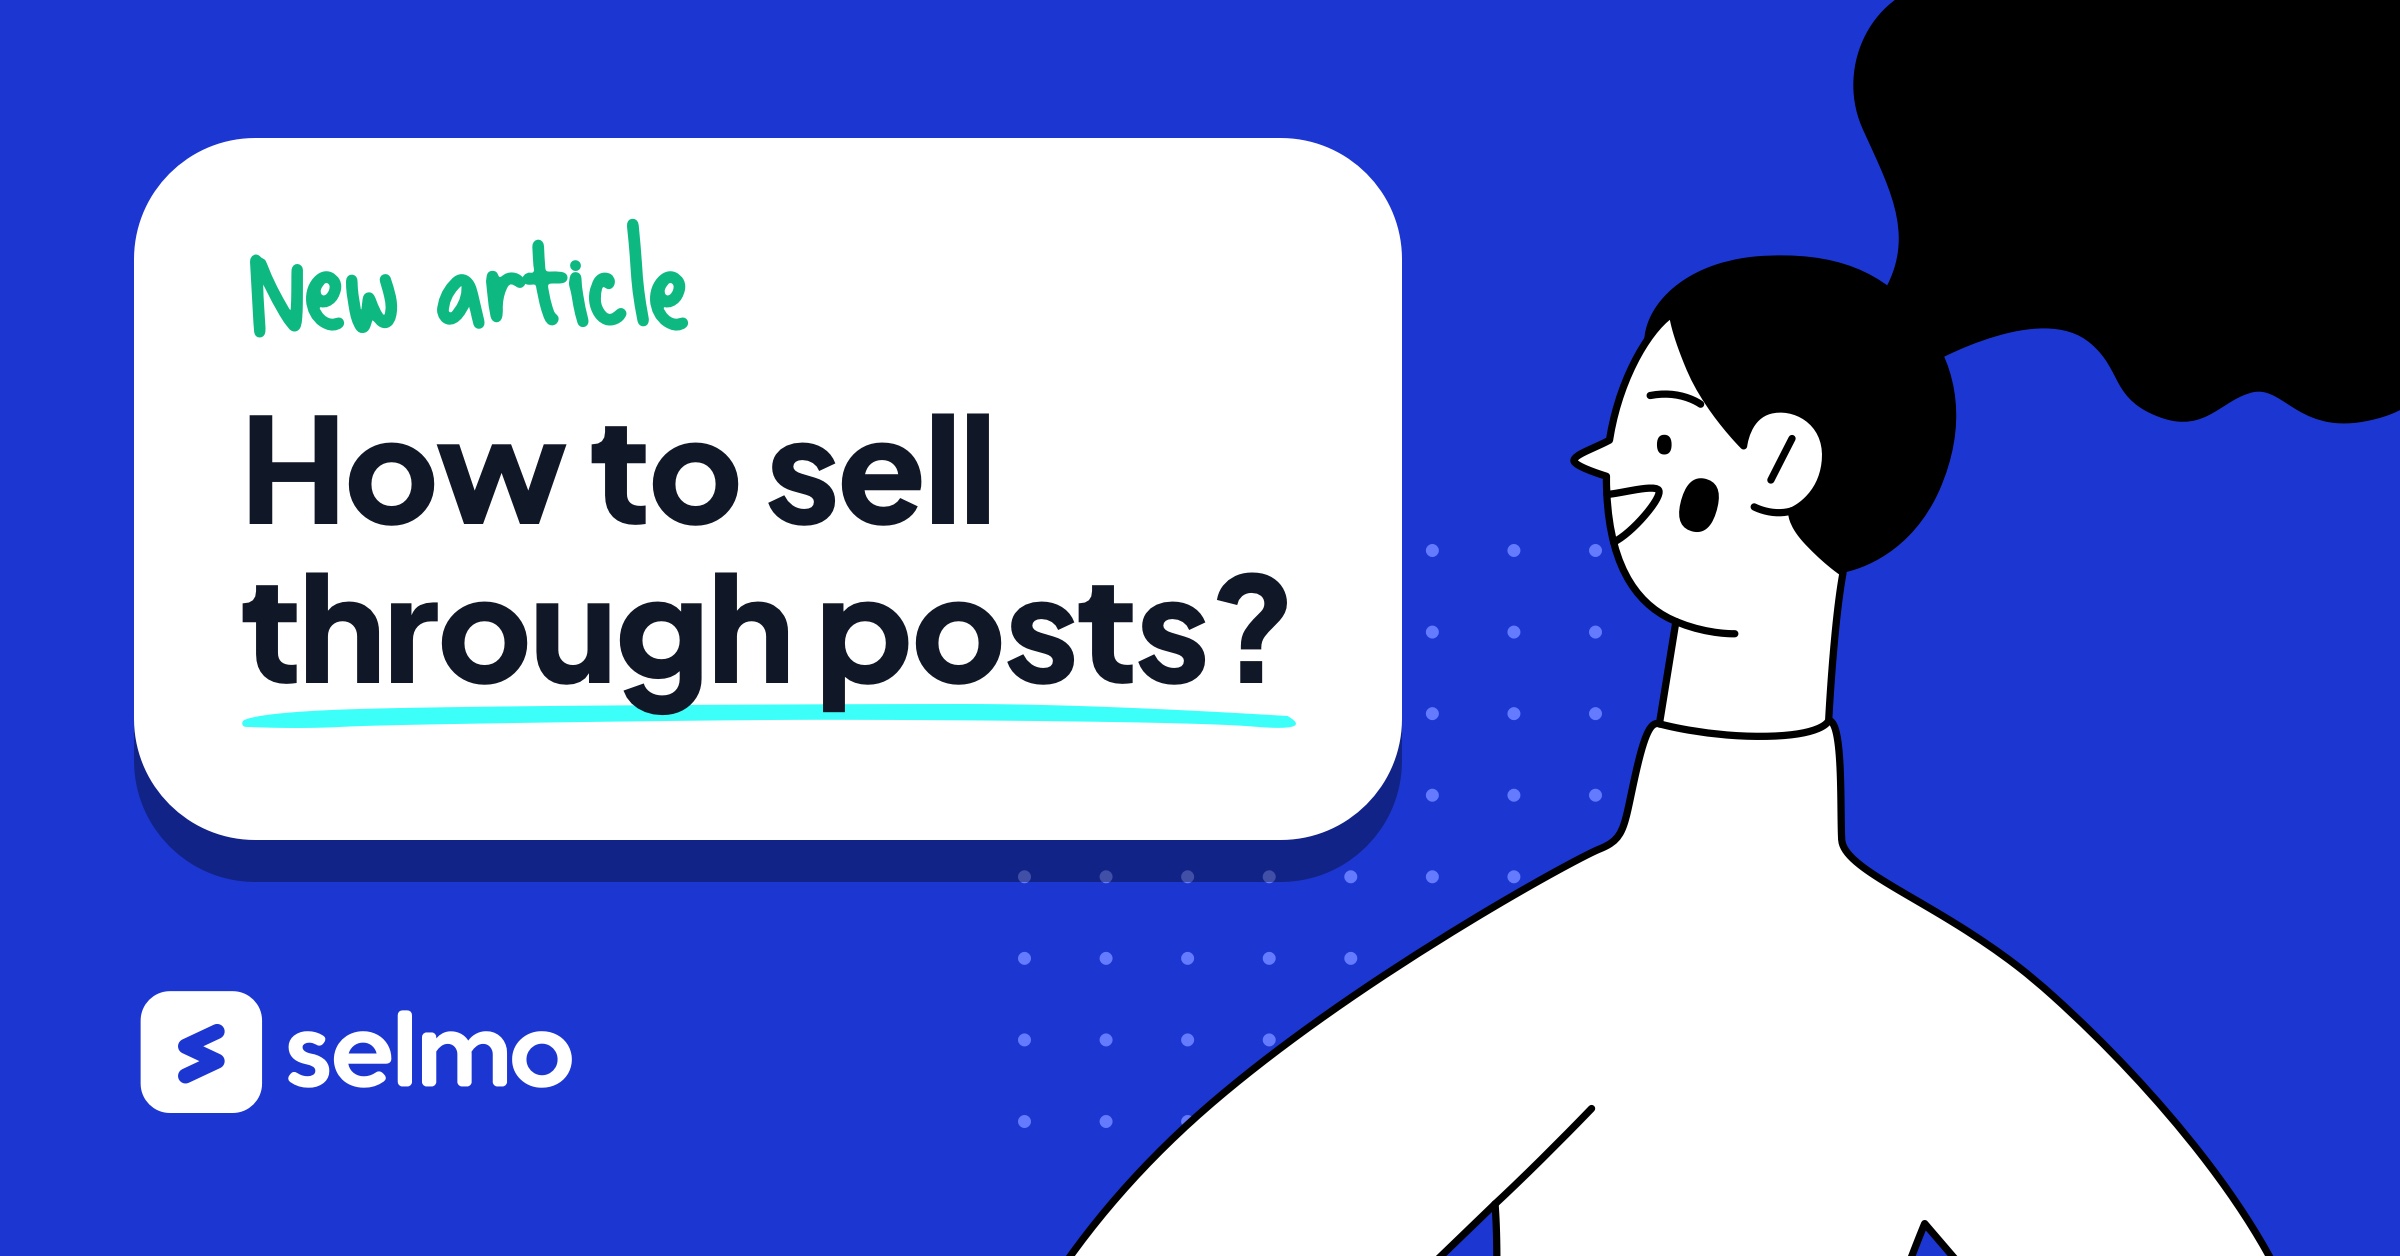 How to sell through posts?